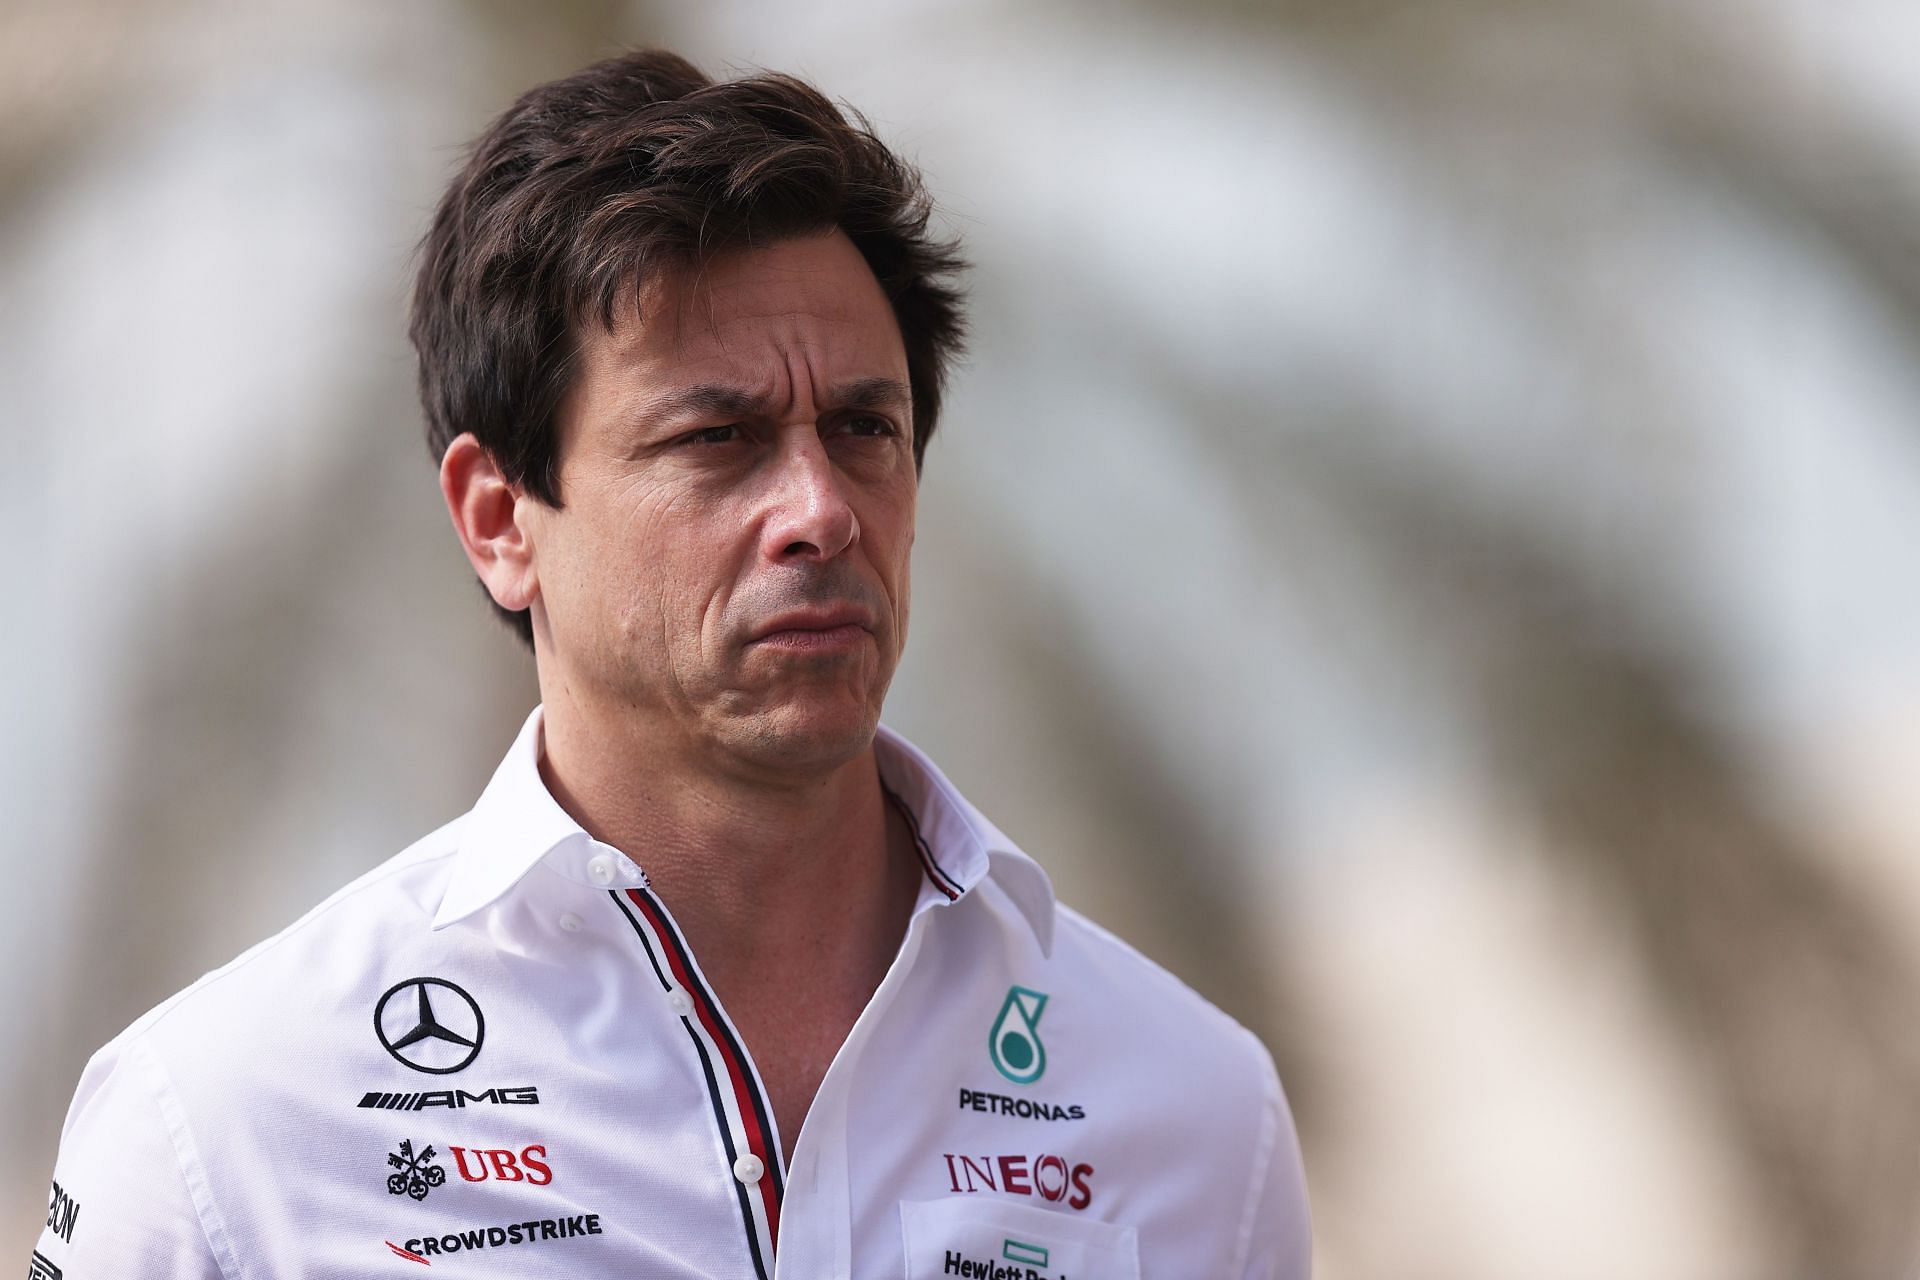 Toto Wolff revealed he &quot;felt burnt out to a certain extent&quot; and contemplated leaving the sport